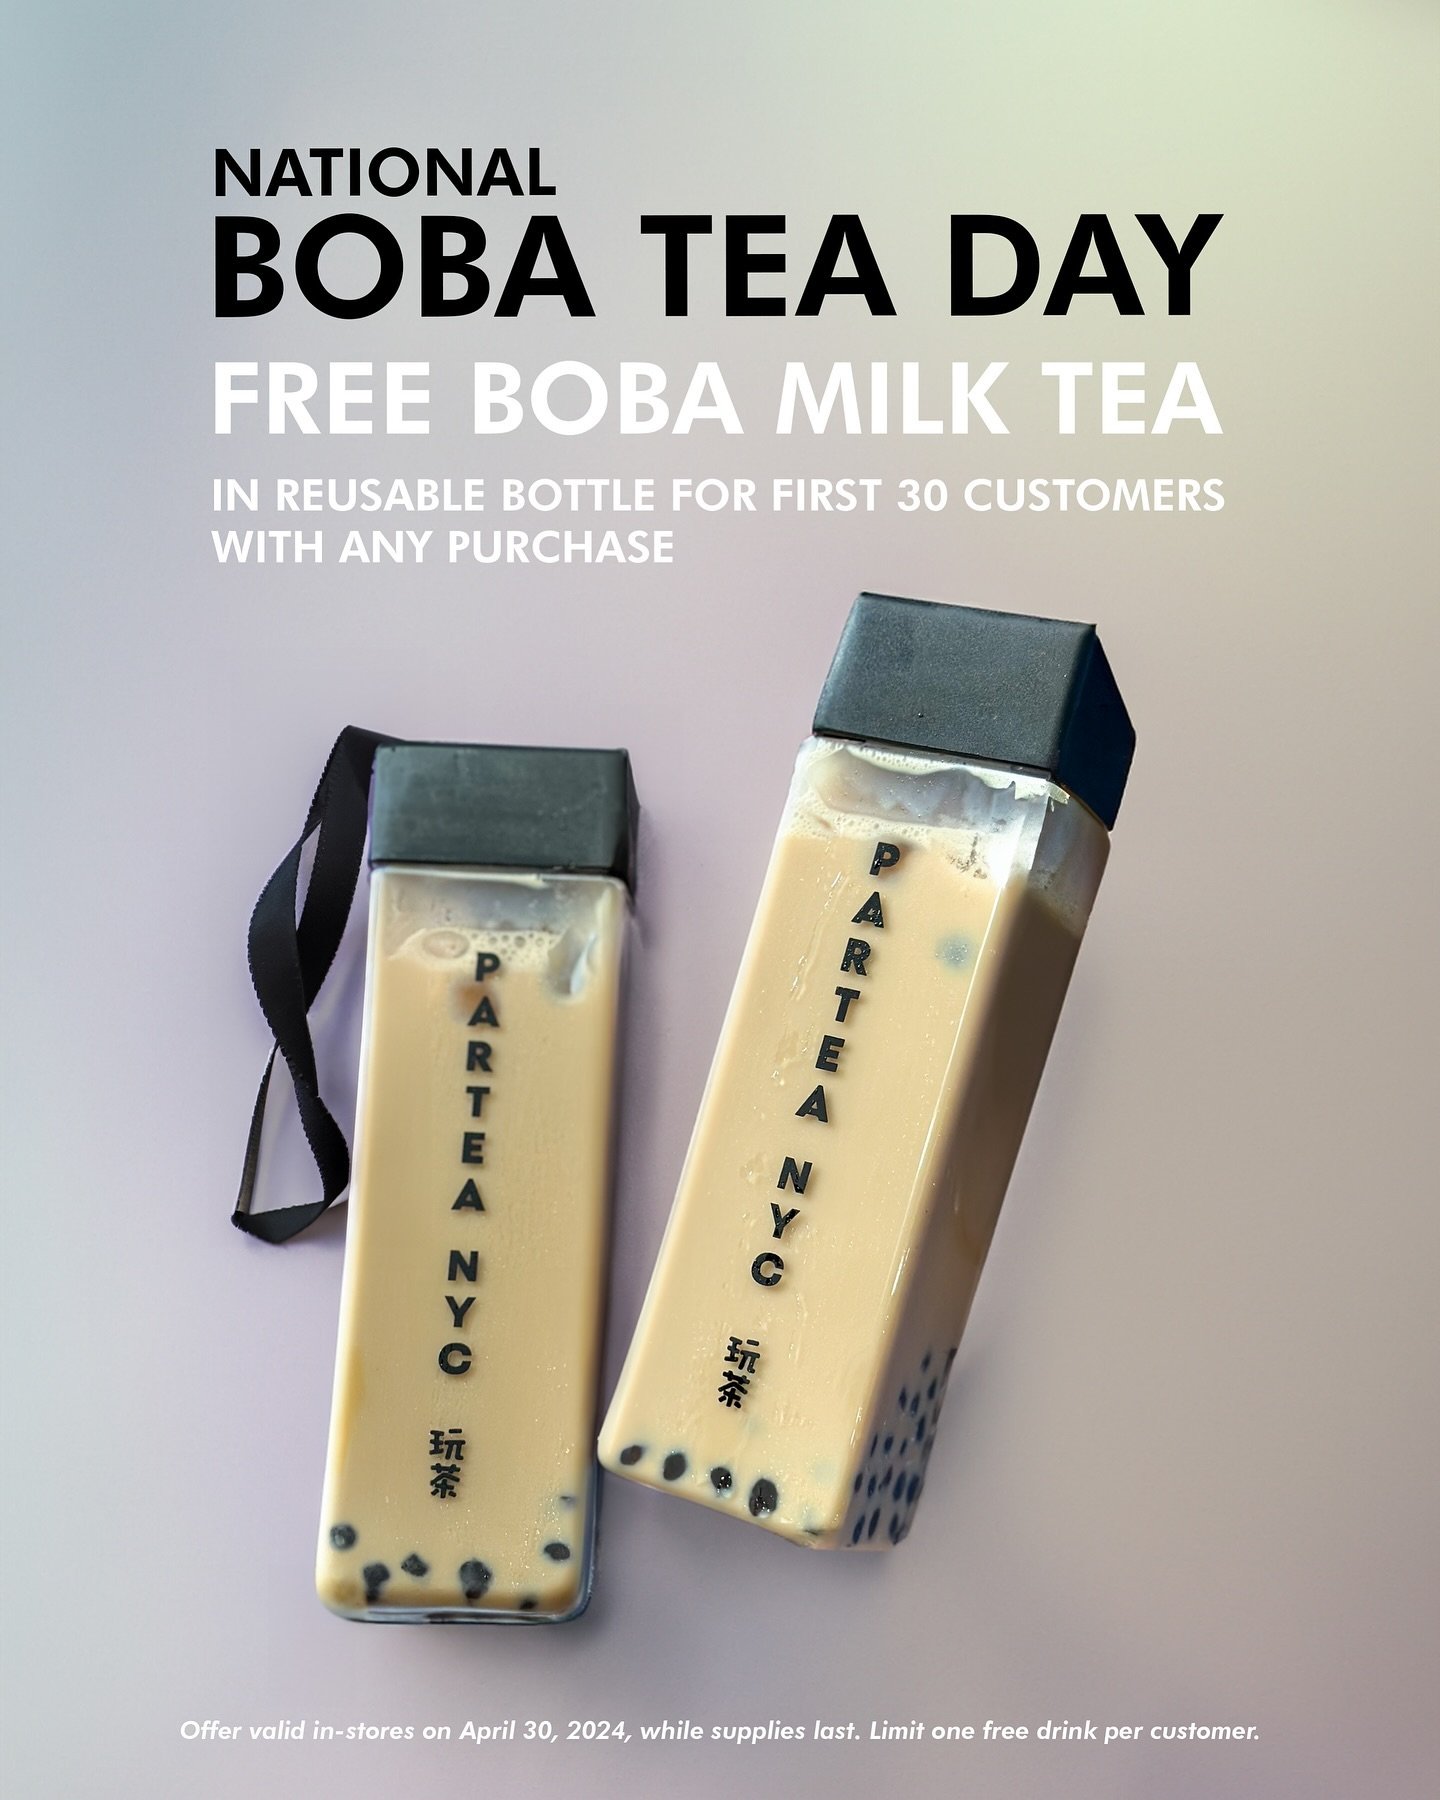 Celebrate National Boba Day with us tomorrow! The first 30 customers get a free boba milk tea in a reusable cup with any purchase.

Offer valid in-stores only, limit one per customer.